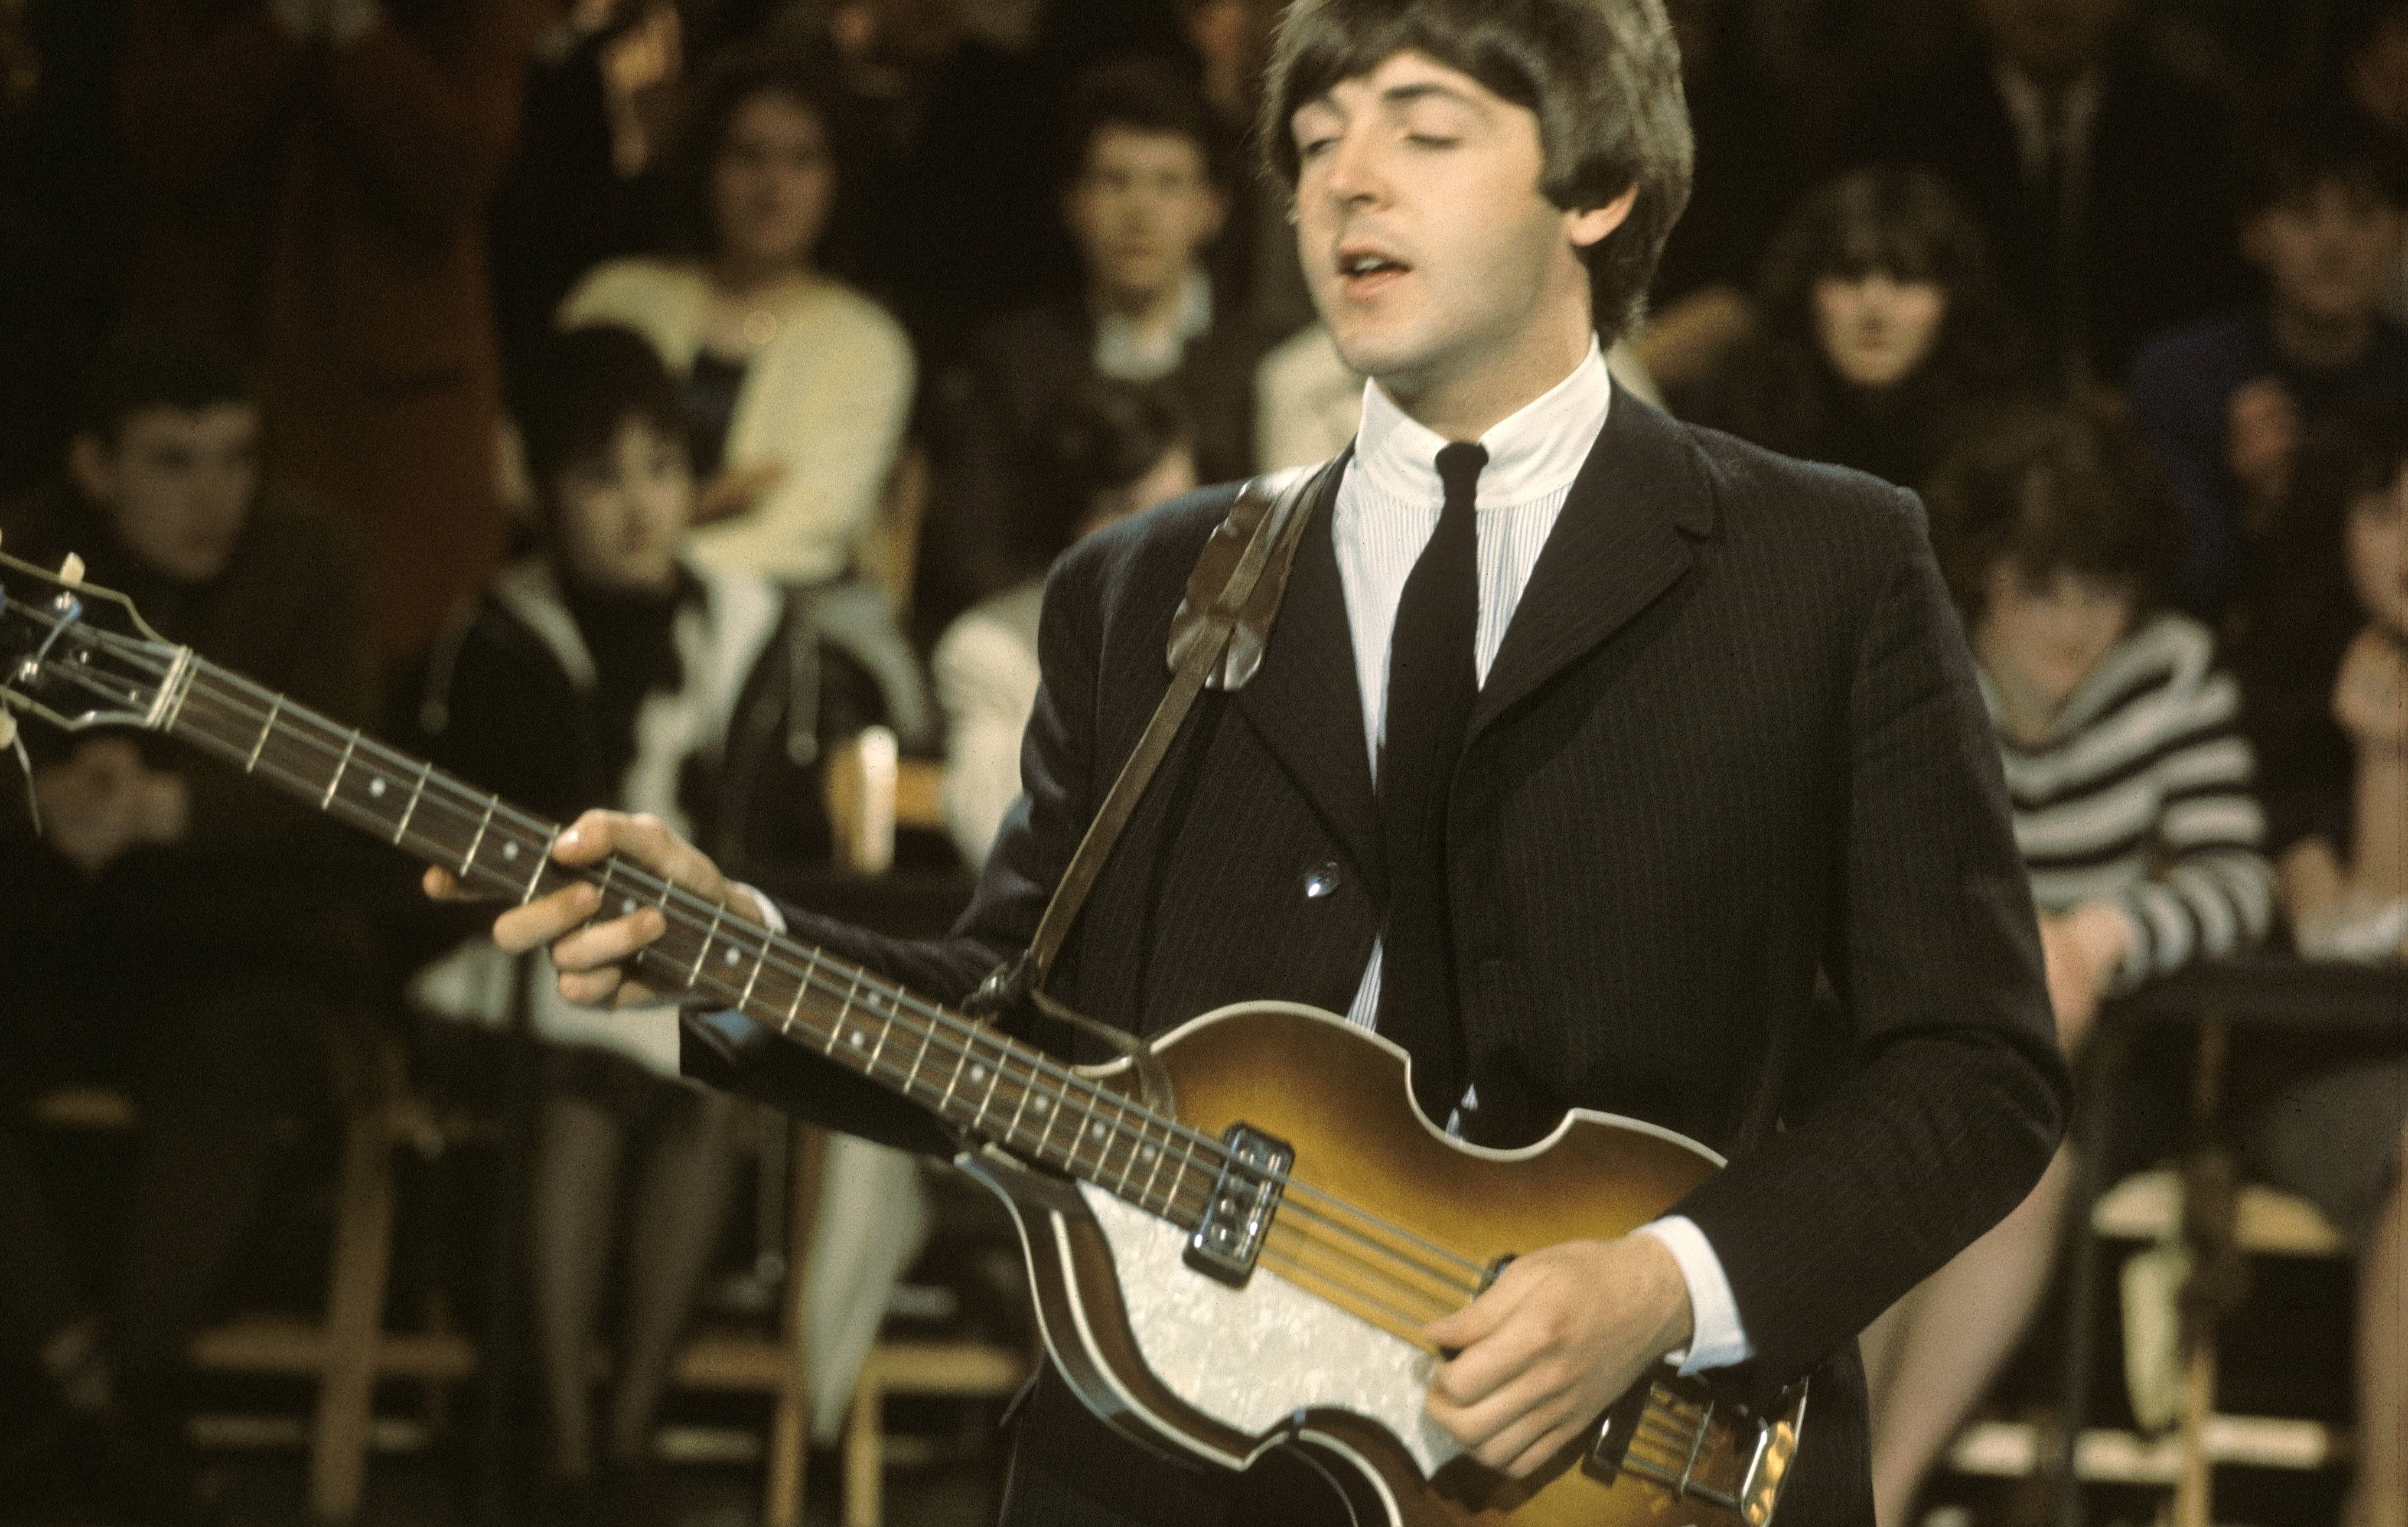 The history of Paul McCartney and his iconic Hofner 500/1 bass guitar